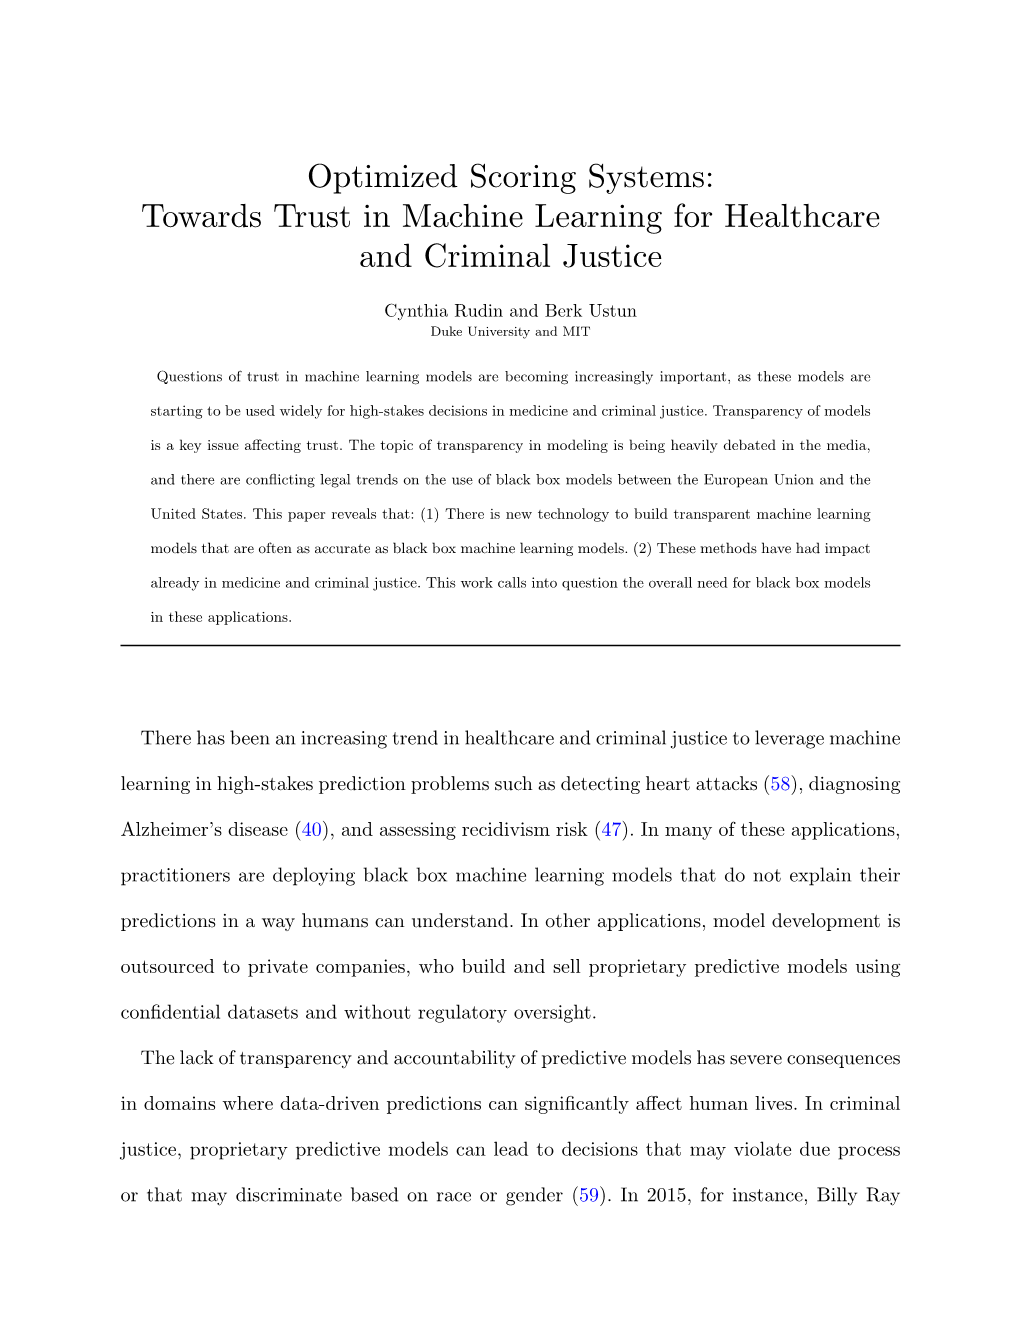 Optimized Scoring Systems: Towards Trust in Machine Learning for Healthcare and Criminal Justice